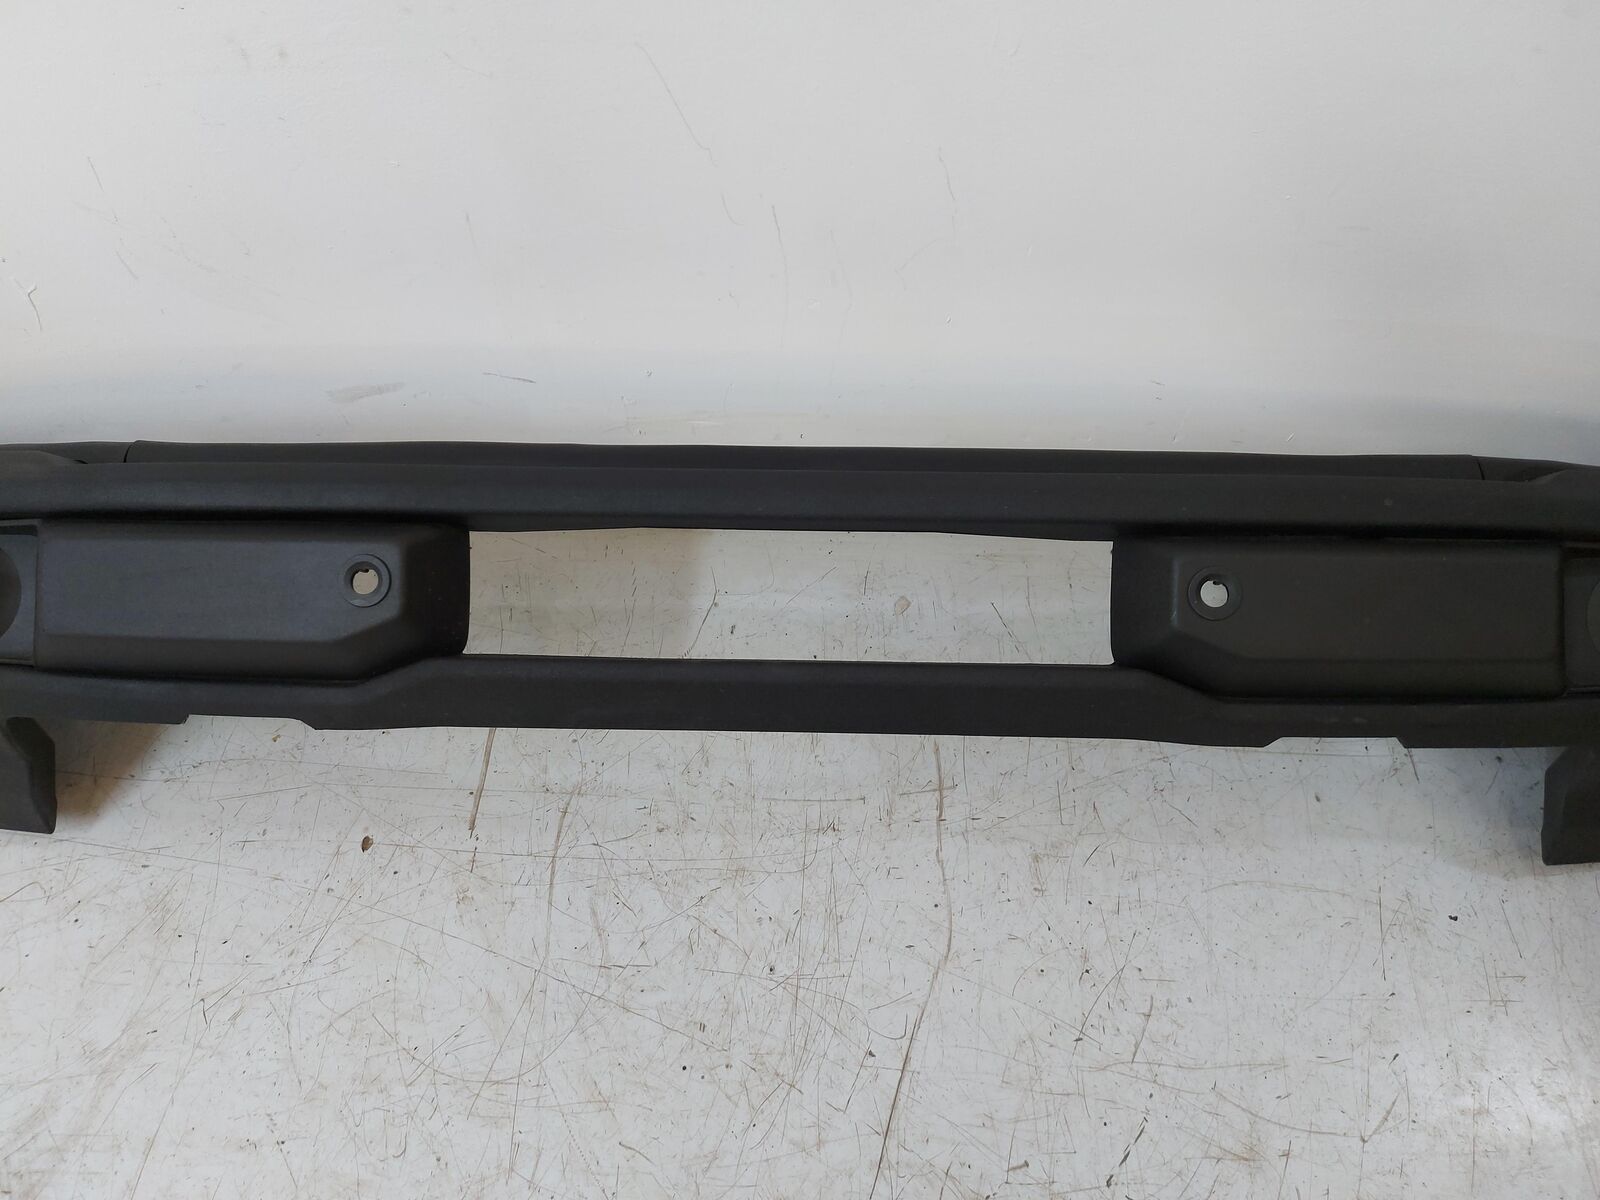 2022 Ford Bronco Front Bumper Cover *warped Cracked* m2DZ-17D957-aa 2K Km's